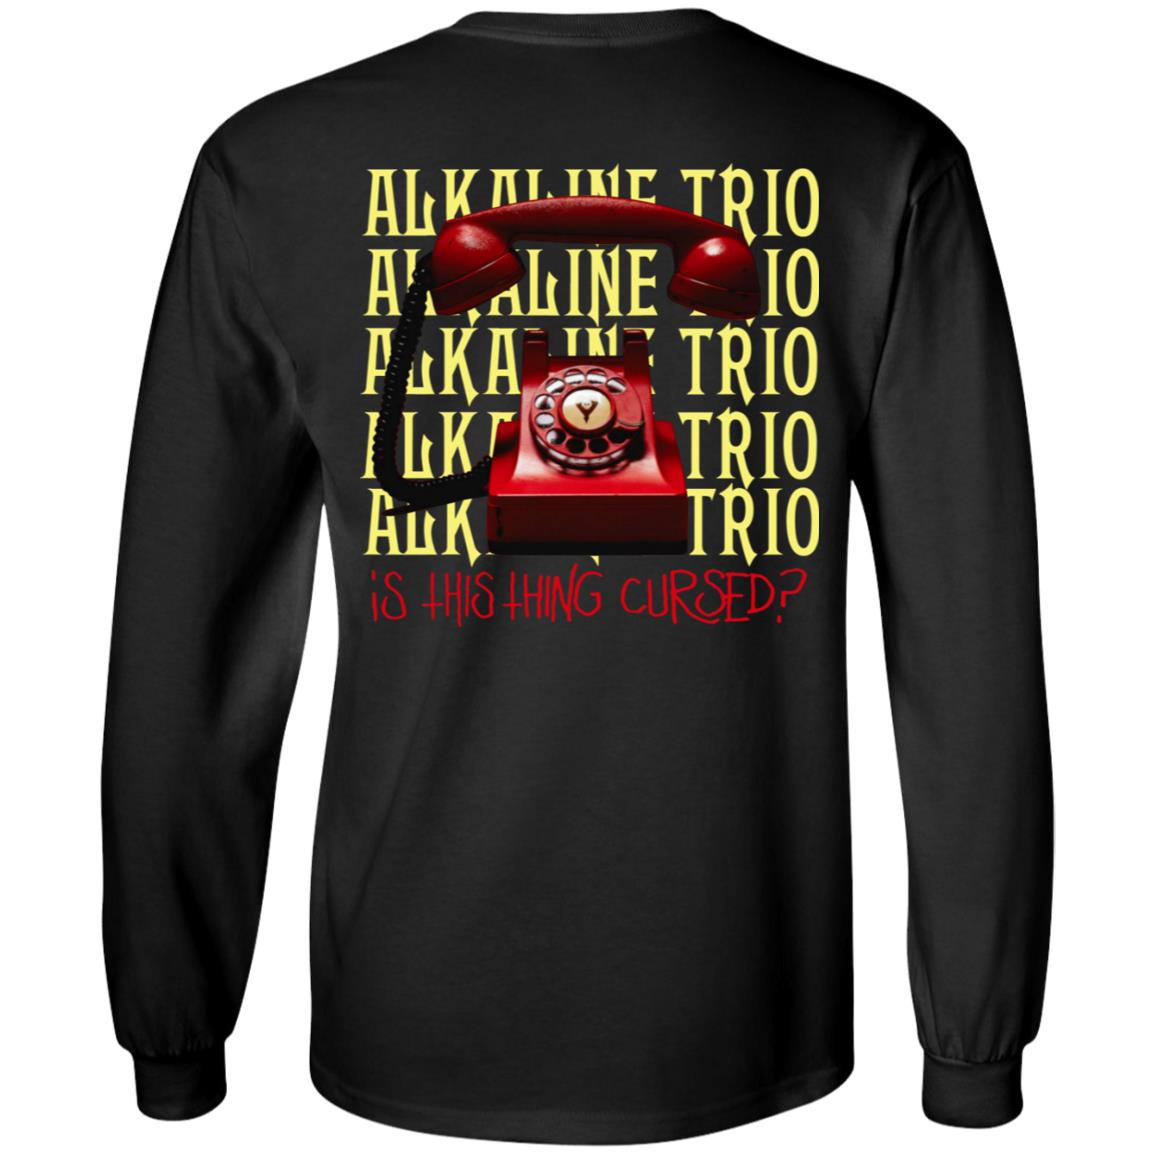 Alkaline Trio Is This Thing Cursed T-Shirt All Sizes New 